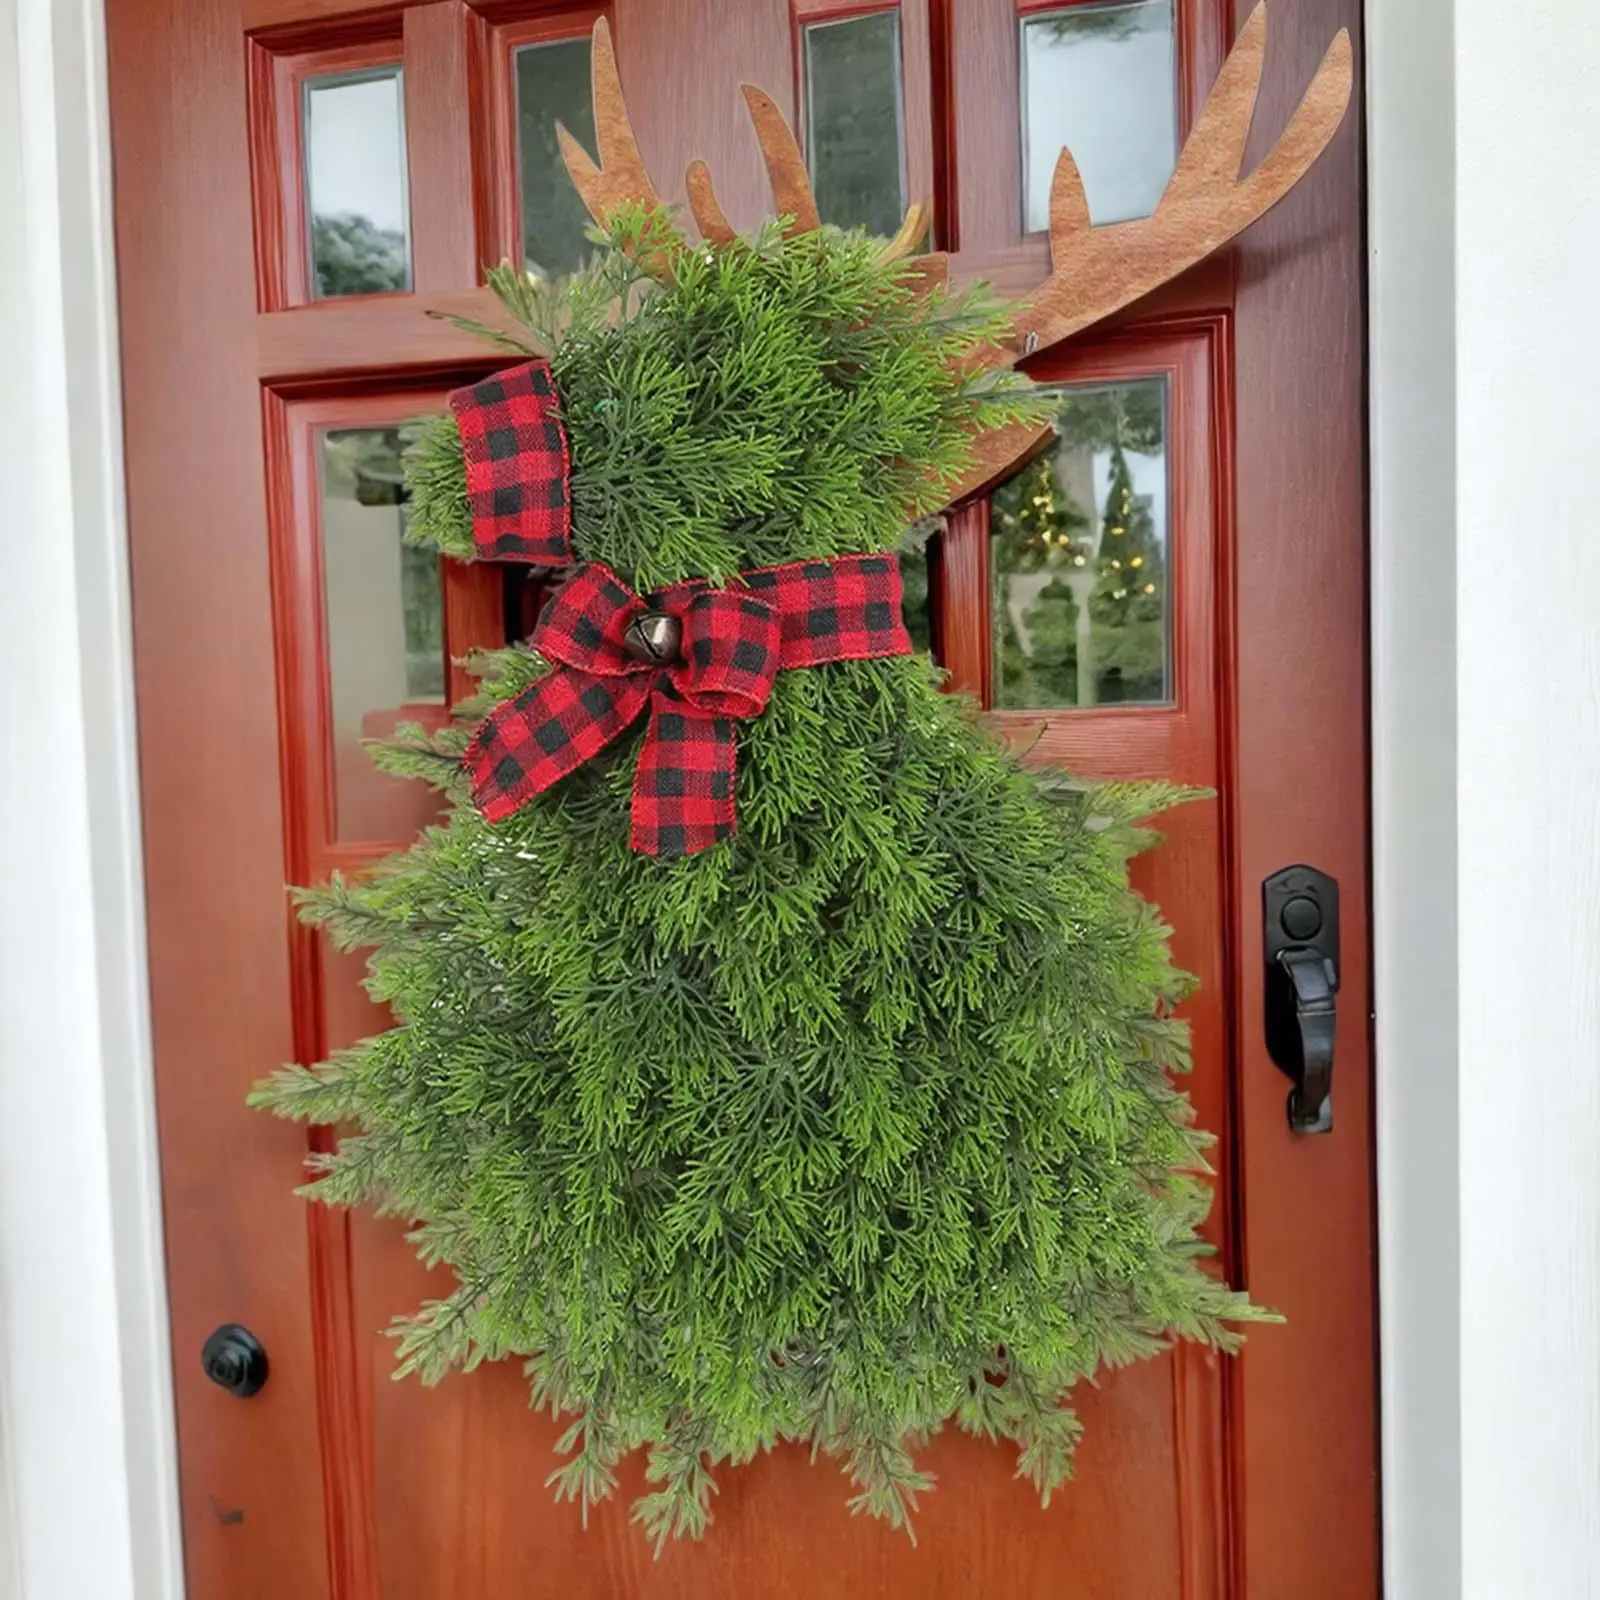 Elk Christmas Wreath Holiday Party Decor Christmas Garland Christmas Party Decorations for Office Porch Home Wall Windows